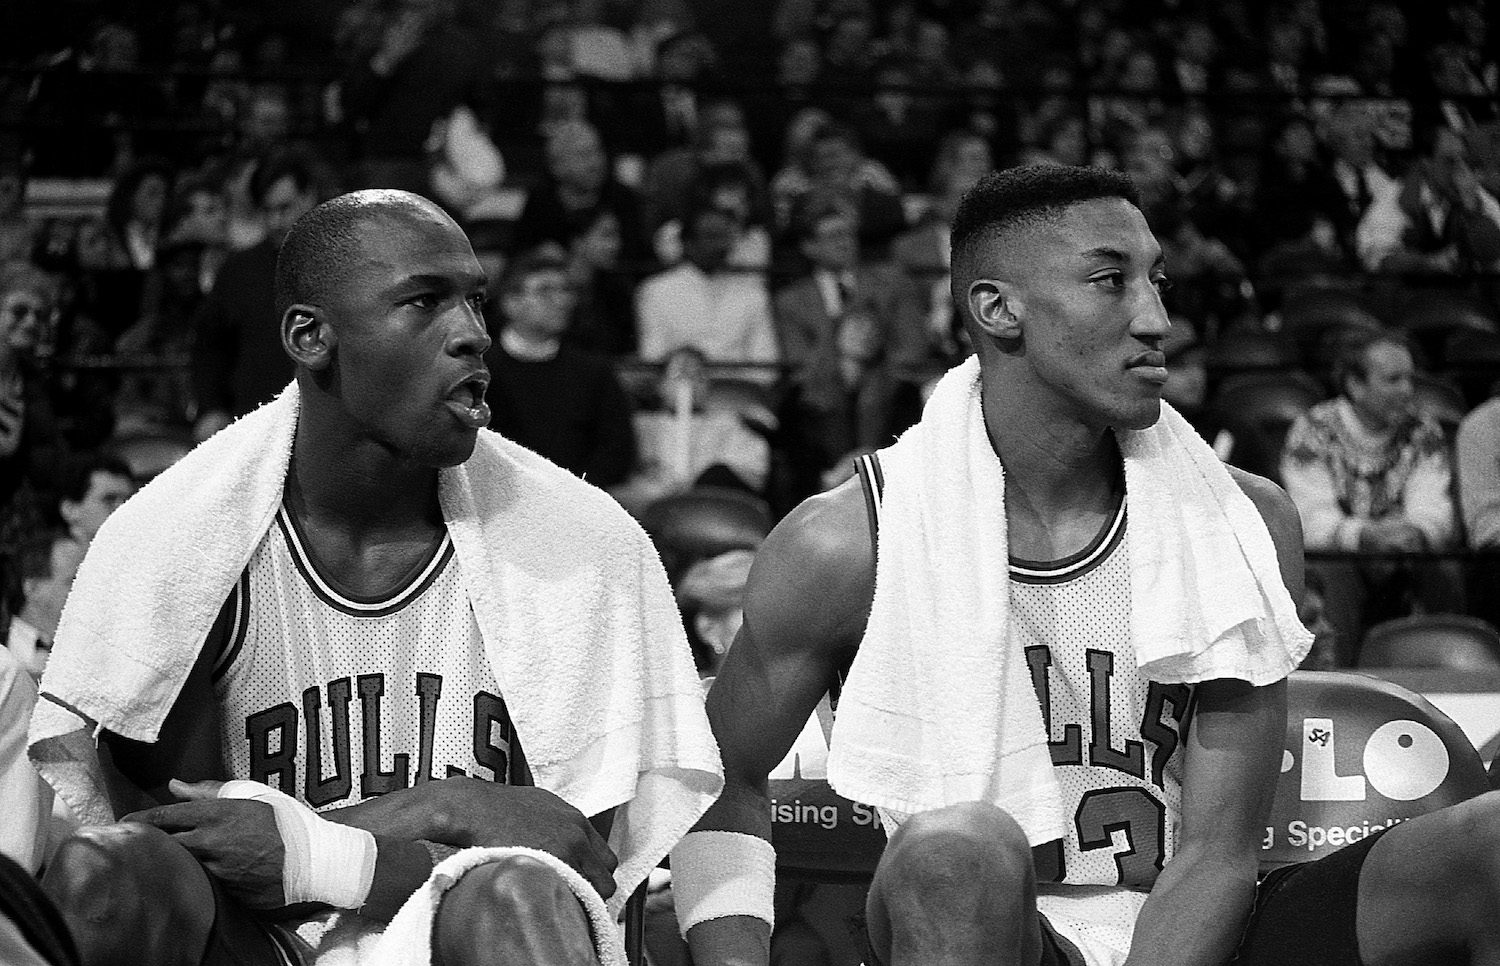 Michael Jordan and Scottie Pippen sit together on the bench during their time as Chicago Bulls teammates.